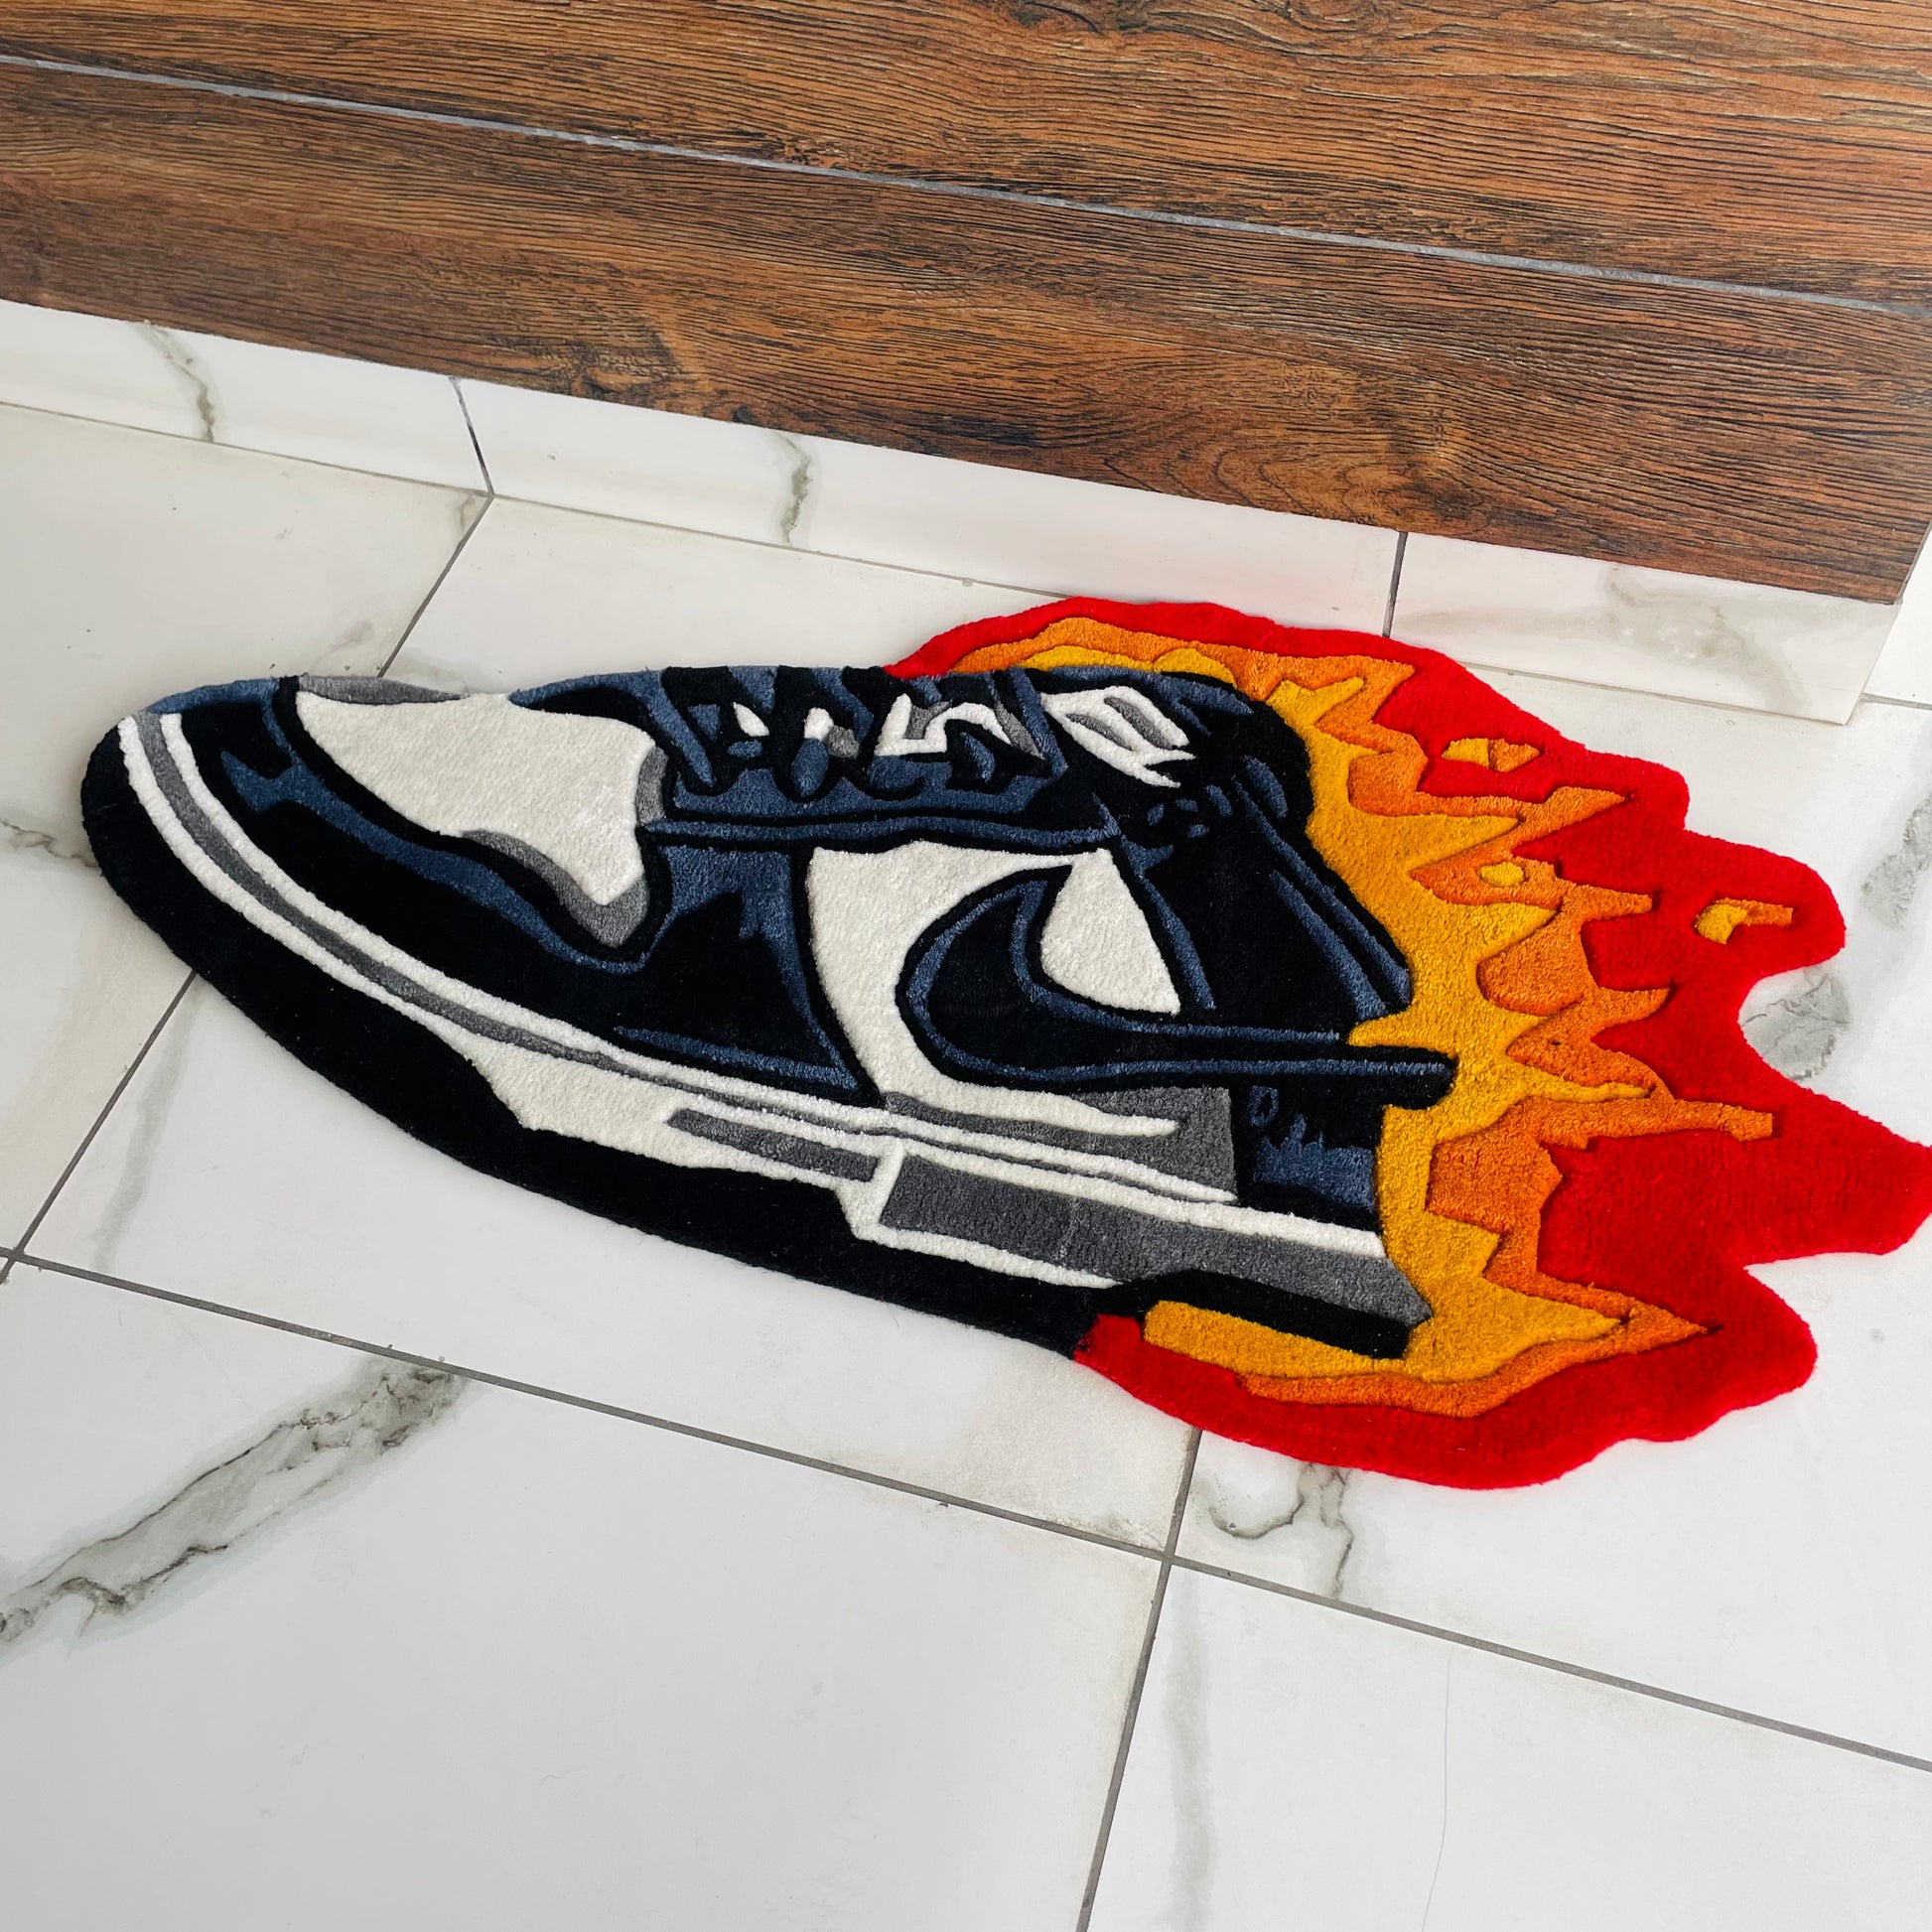 Sneaker Heat Check Hand-Tufted Rug